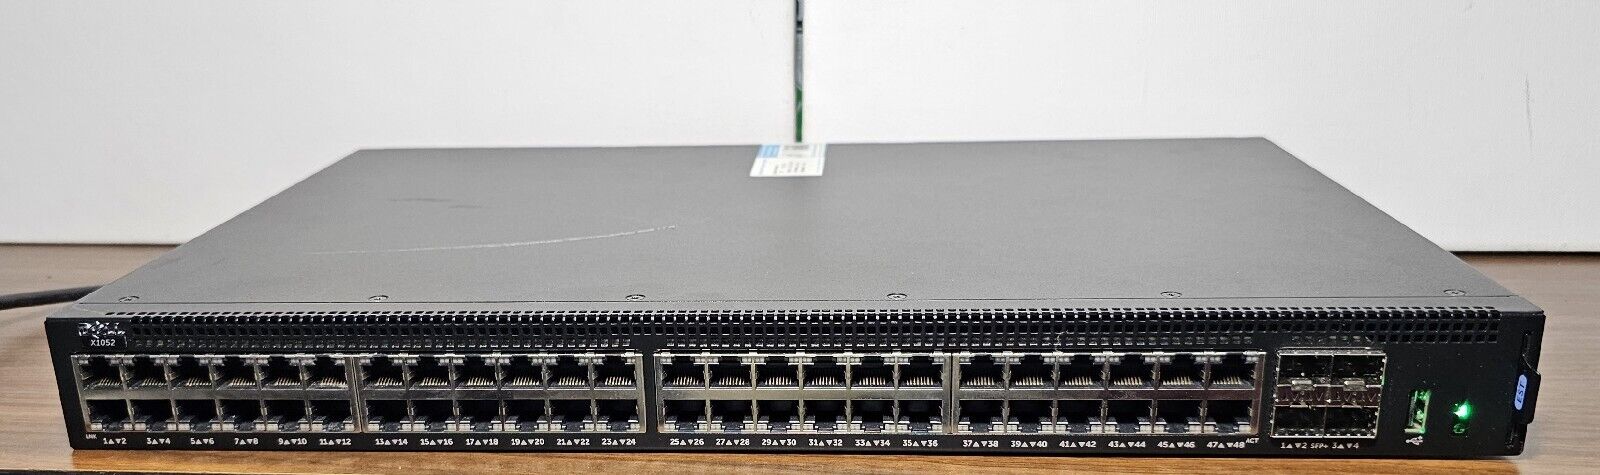 Dell Networking X1052 48 Port  Gigabit Managed Switch E12W